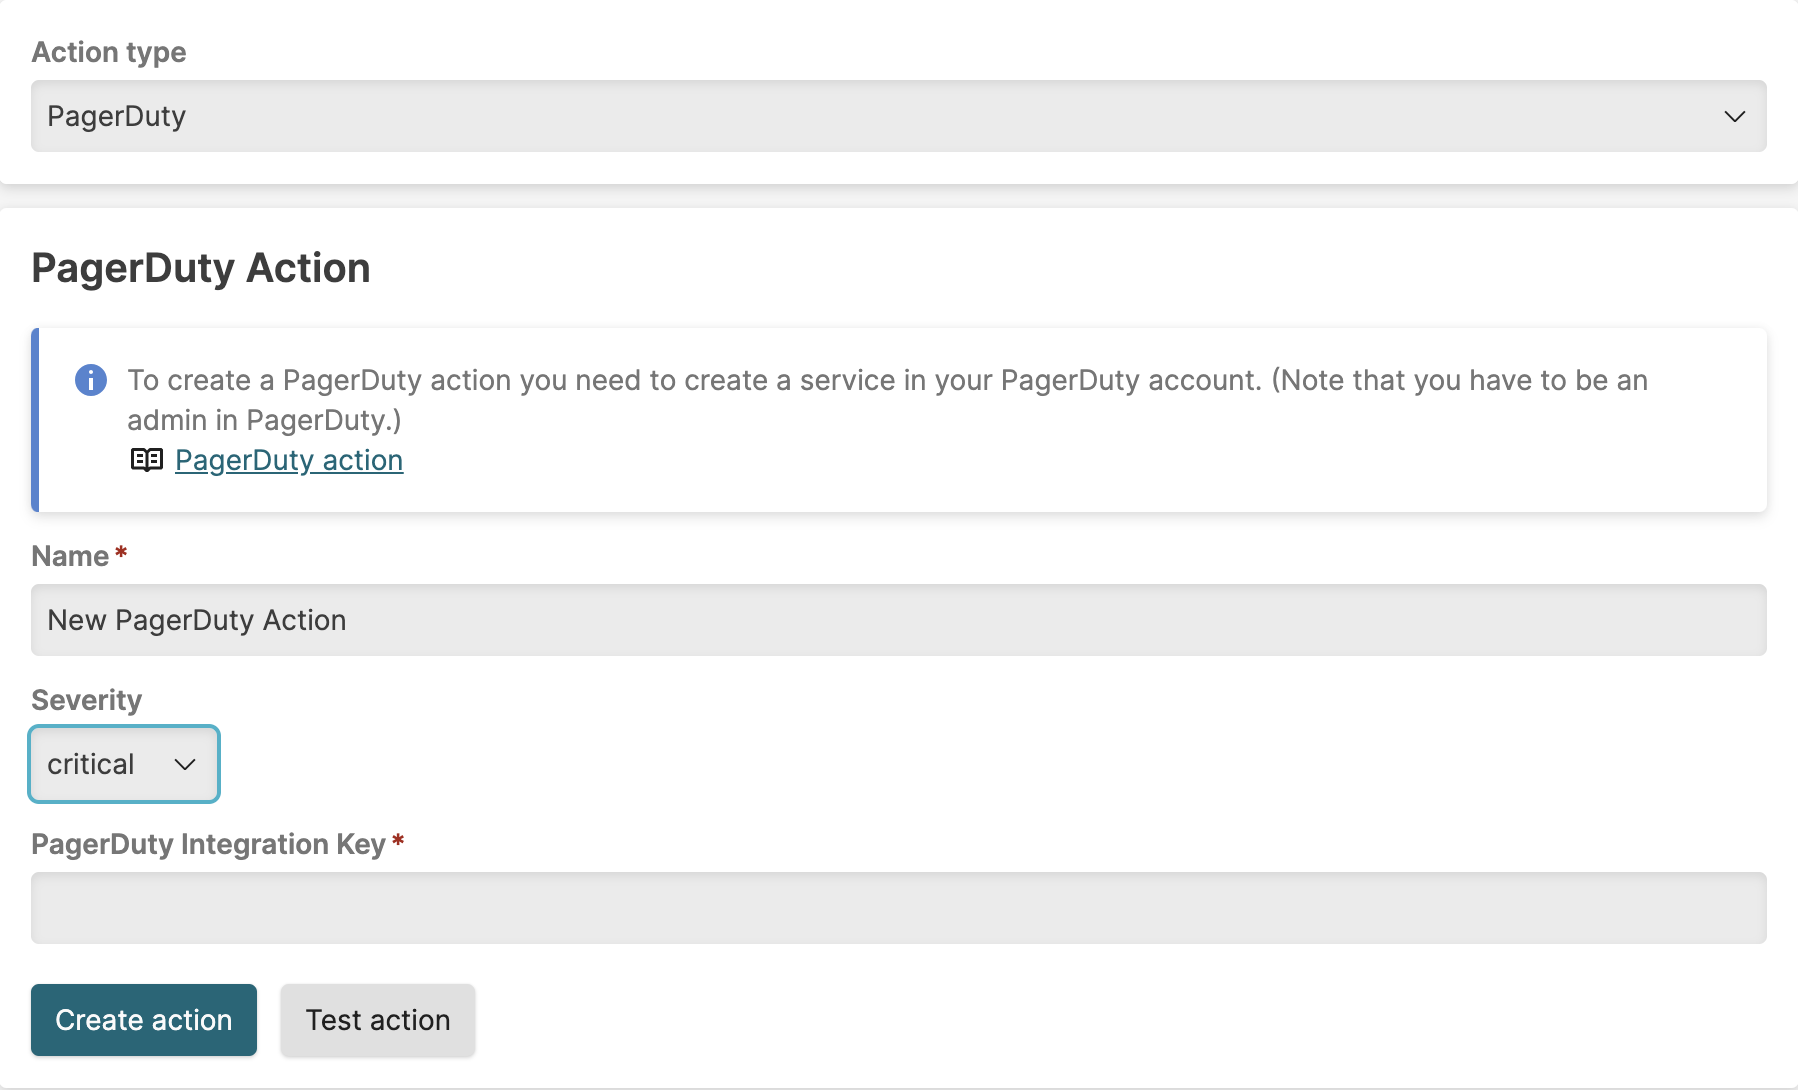 Configuring PagerDuty Action